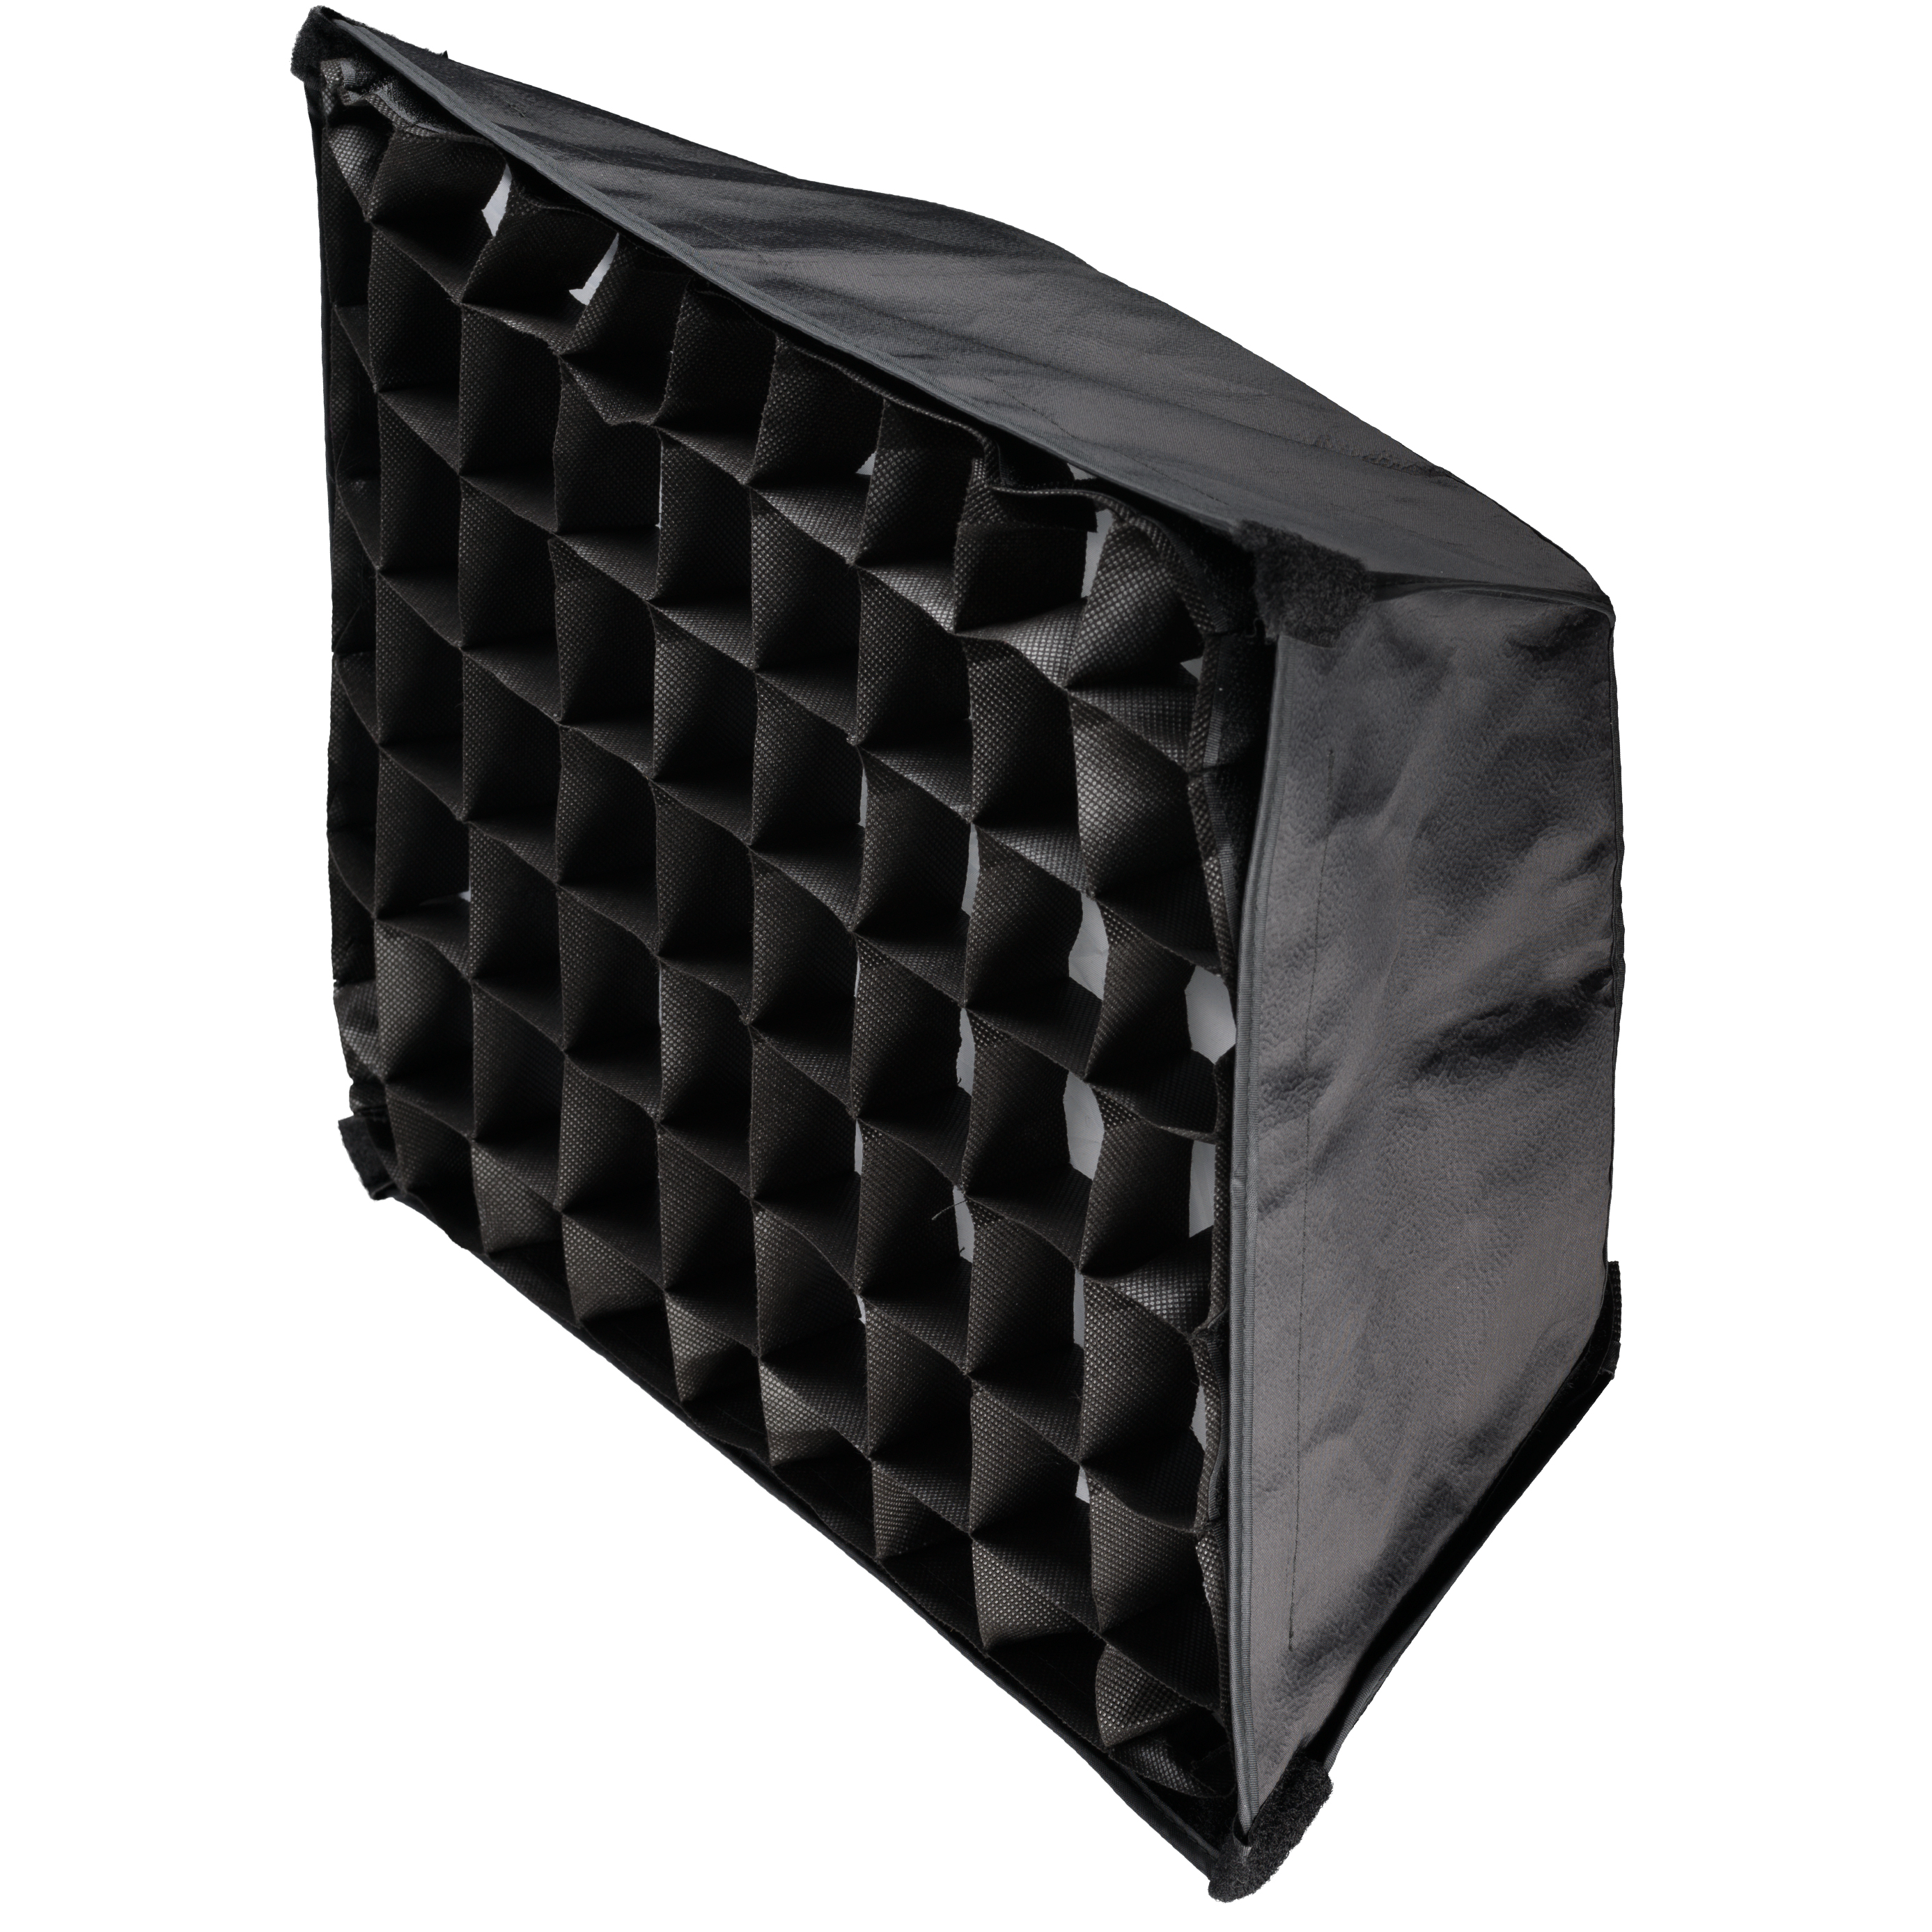 BRESSER Softbox and Honeycomb Grid for BR-S60B PRO Bi-Colour LED Panel Lamp 60W